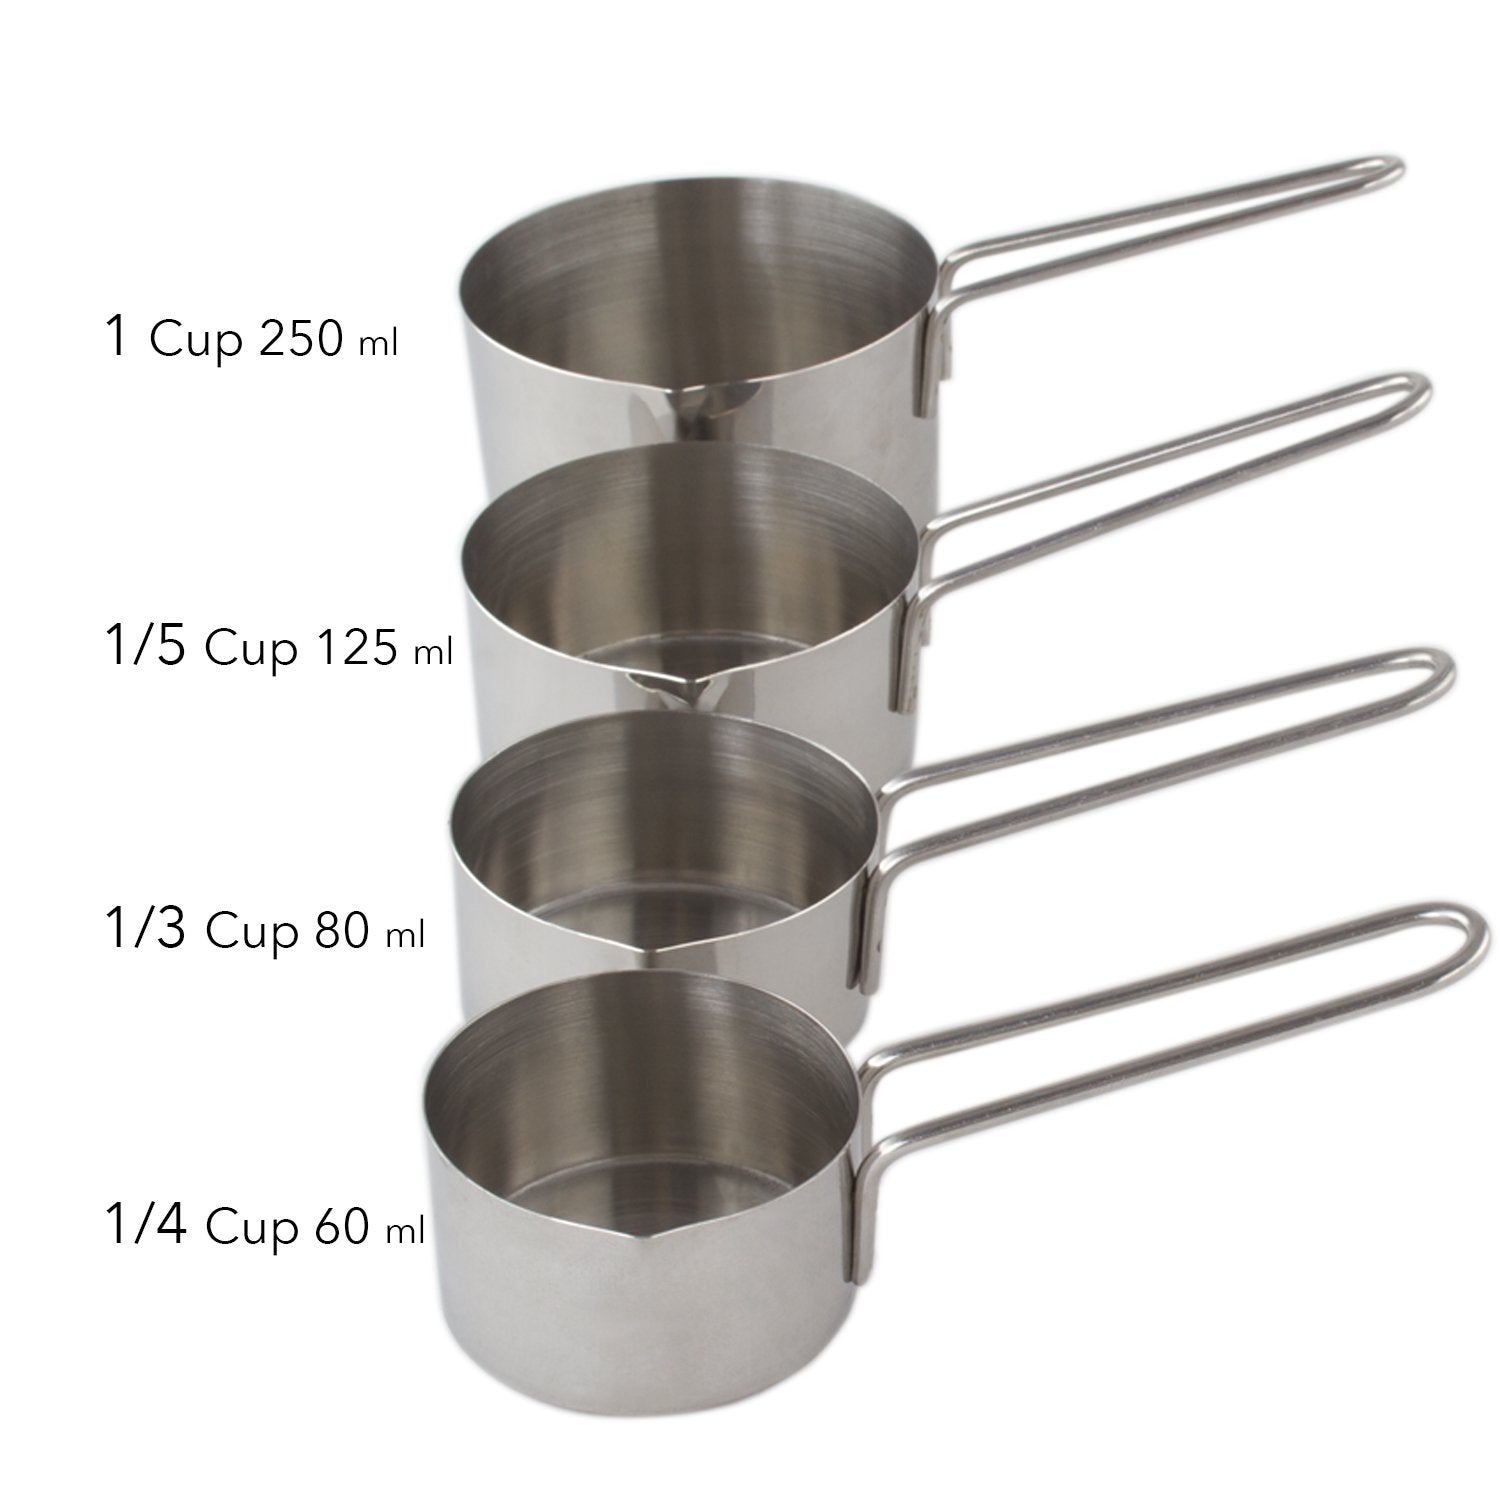 Stainless Steel Measuring Cups and Measuring Spoons Set - 8 Pcs Nesting Metal Measuring Cups Set